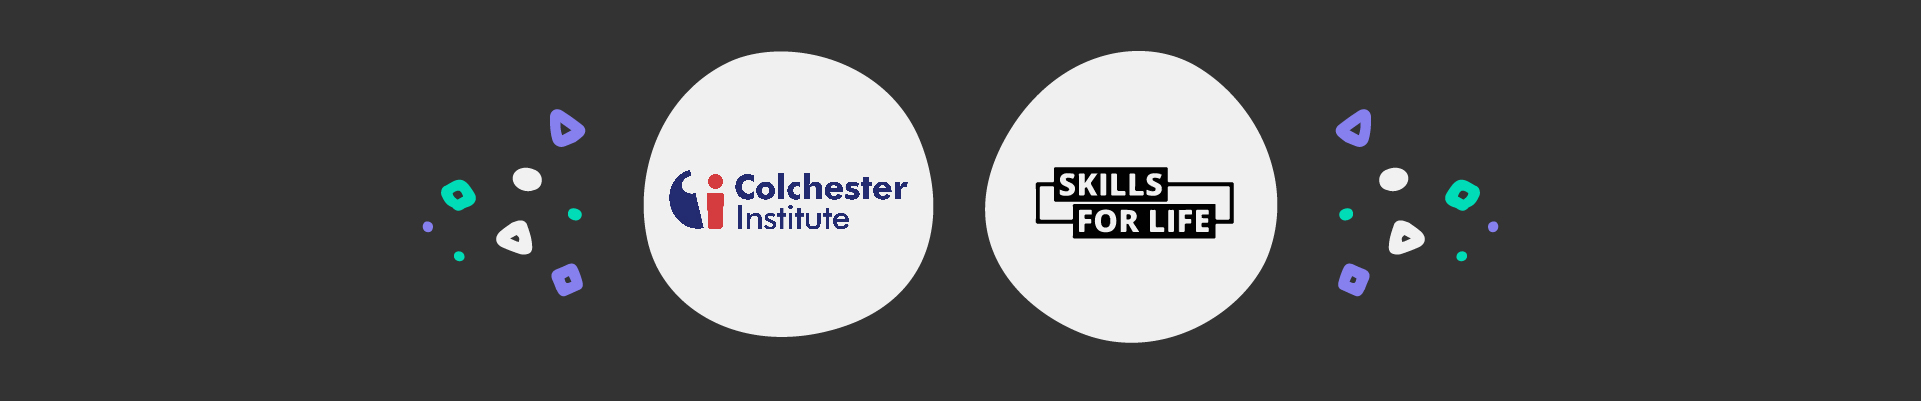 Colchester Institute logo and Skills for Life logo